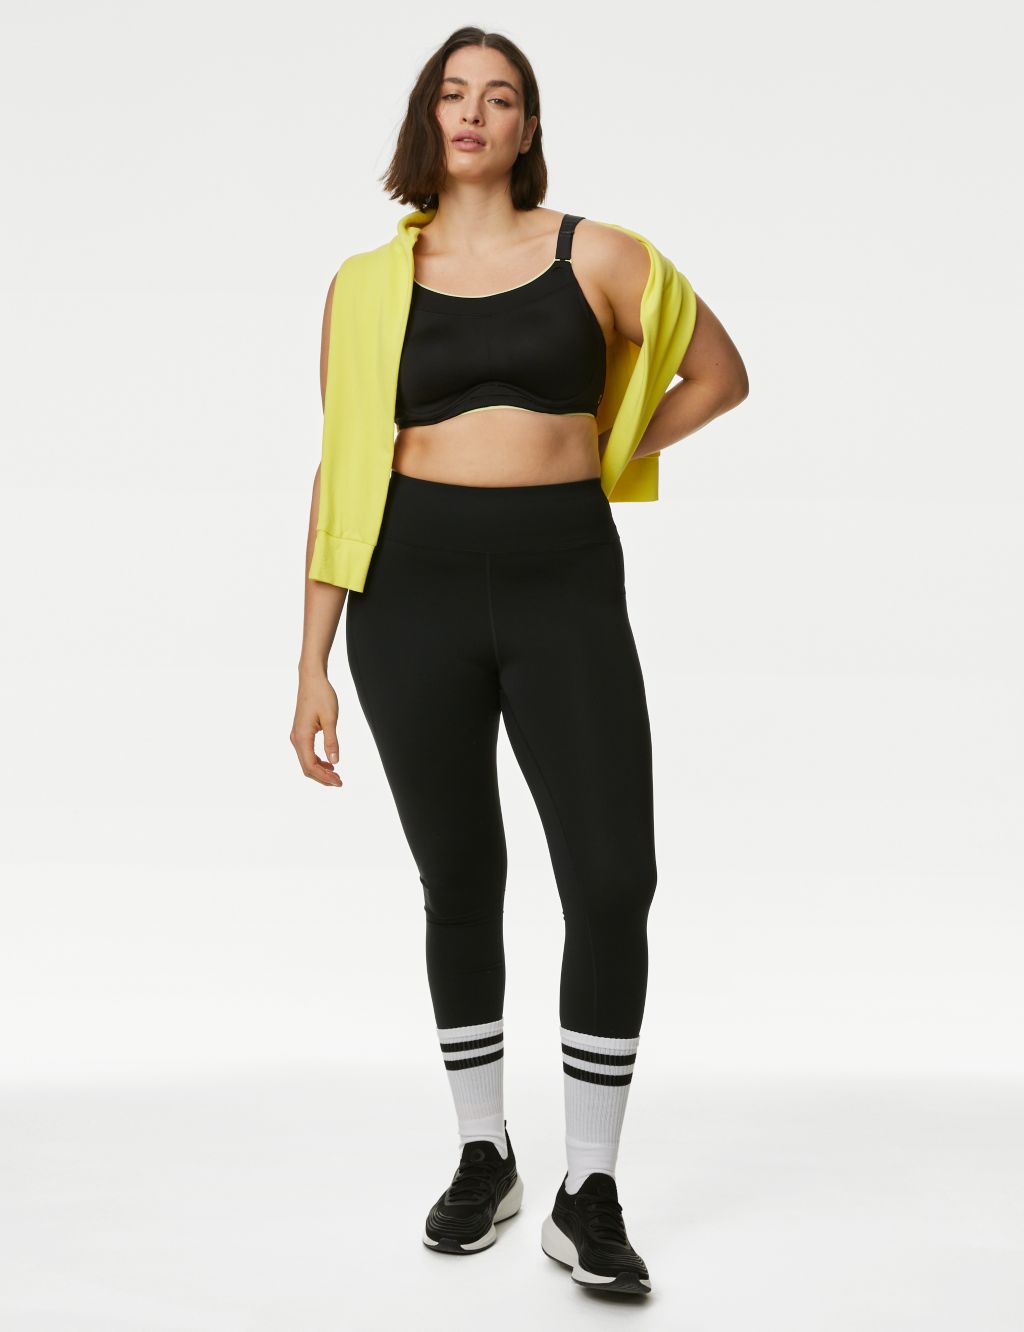 Ultimate Support Serious Sports Bra A-E image 1